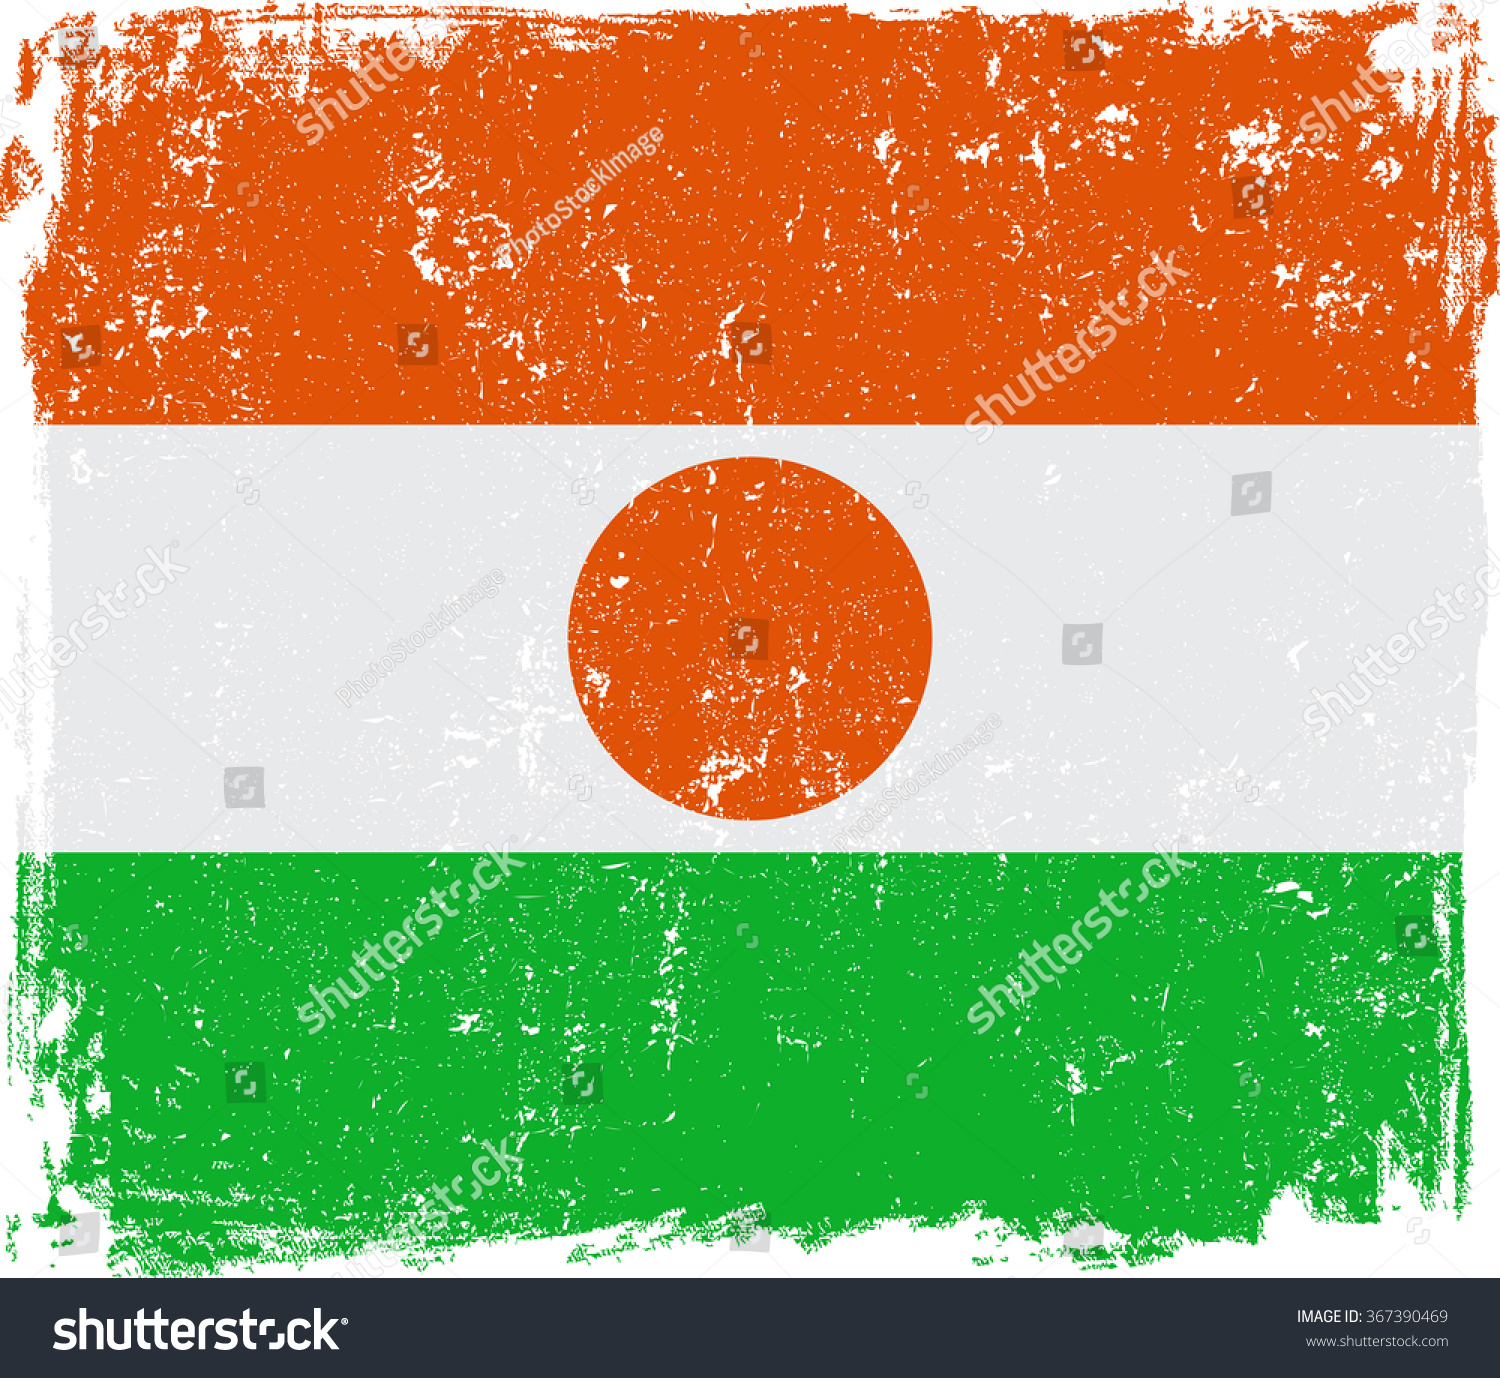 Niger Vector Grunge Flag Isolated On Stock Vector 367390469 ...